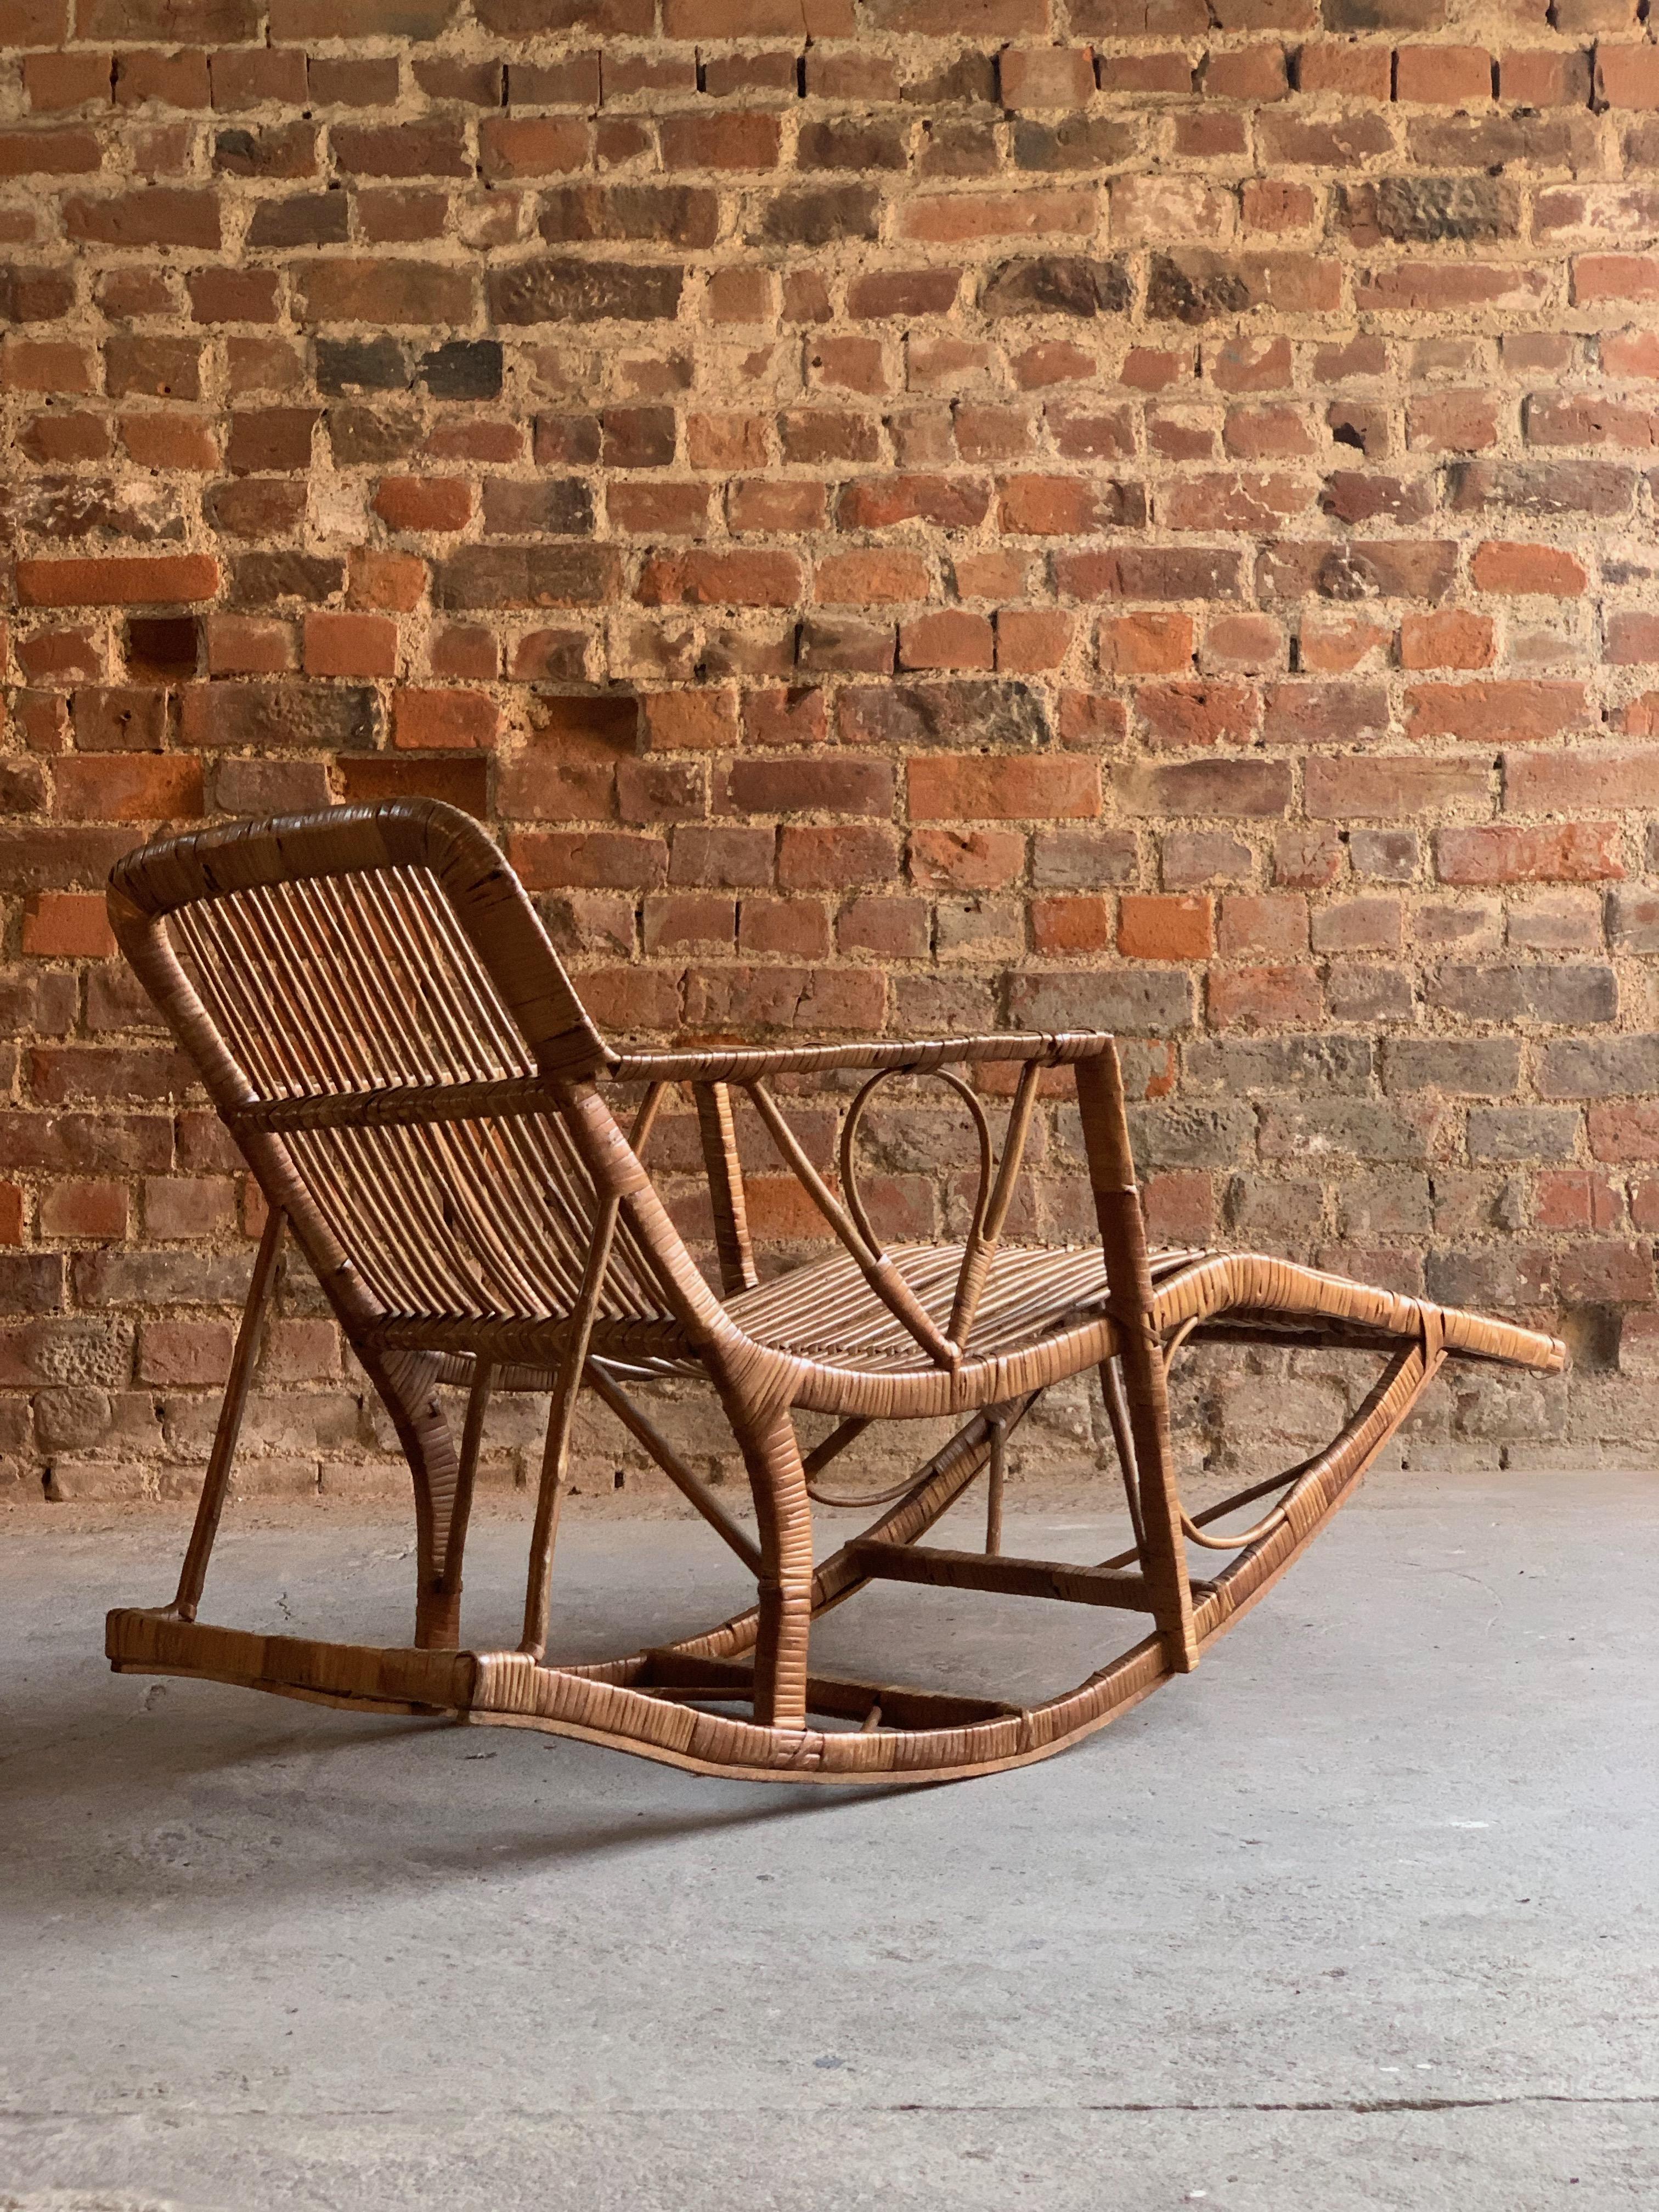 Portuguese Midcentury Rattan Daybed Chaise Longue Rocker Madeira, circa 1950